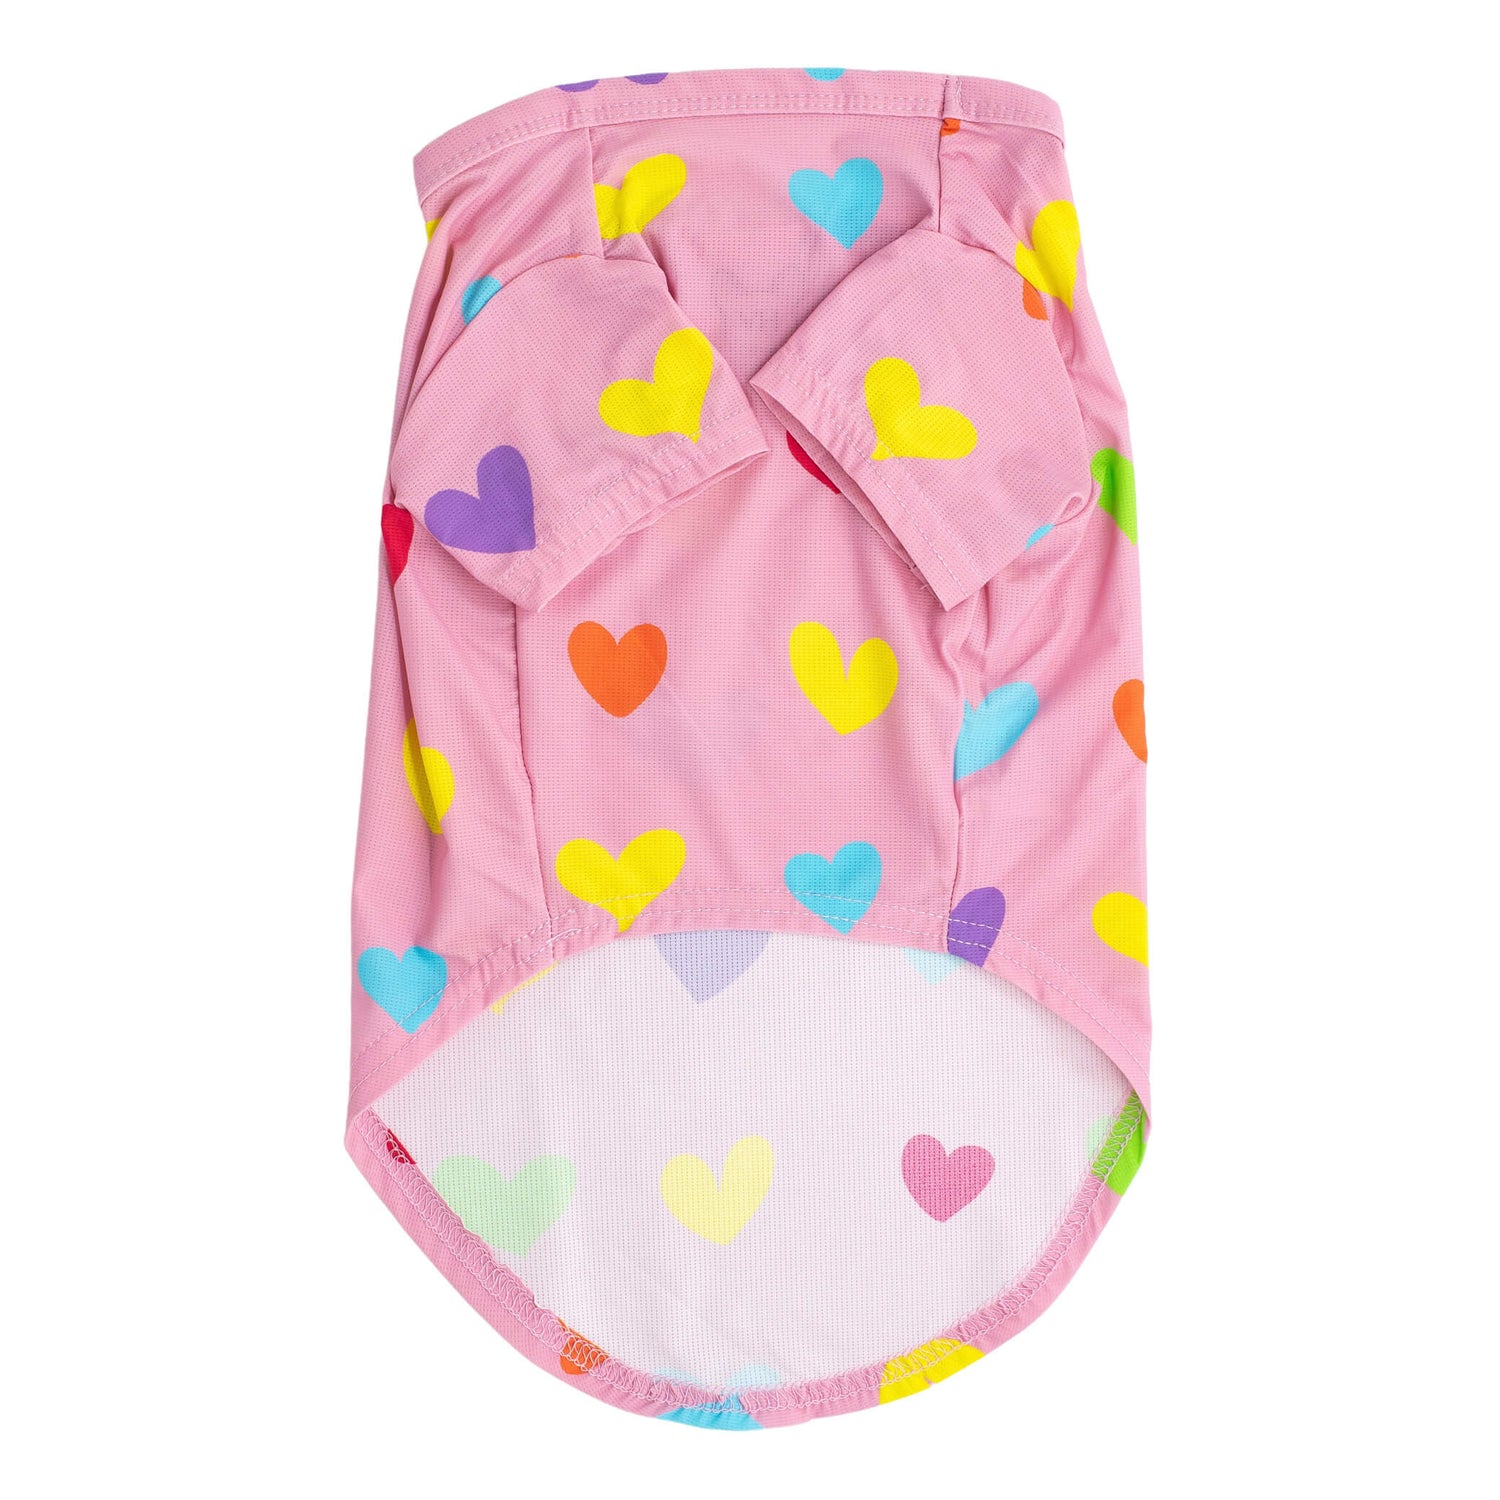 A front flat lay of a pink shirt with orange, blue, yellow, and green love hearts printed on it.  This shirt for dogs is designed to be wet to cool dogs down.